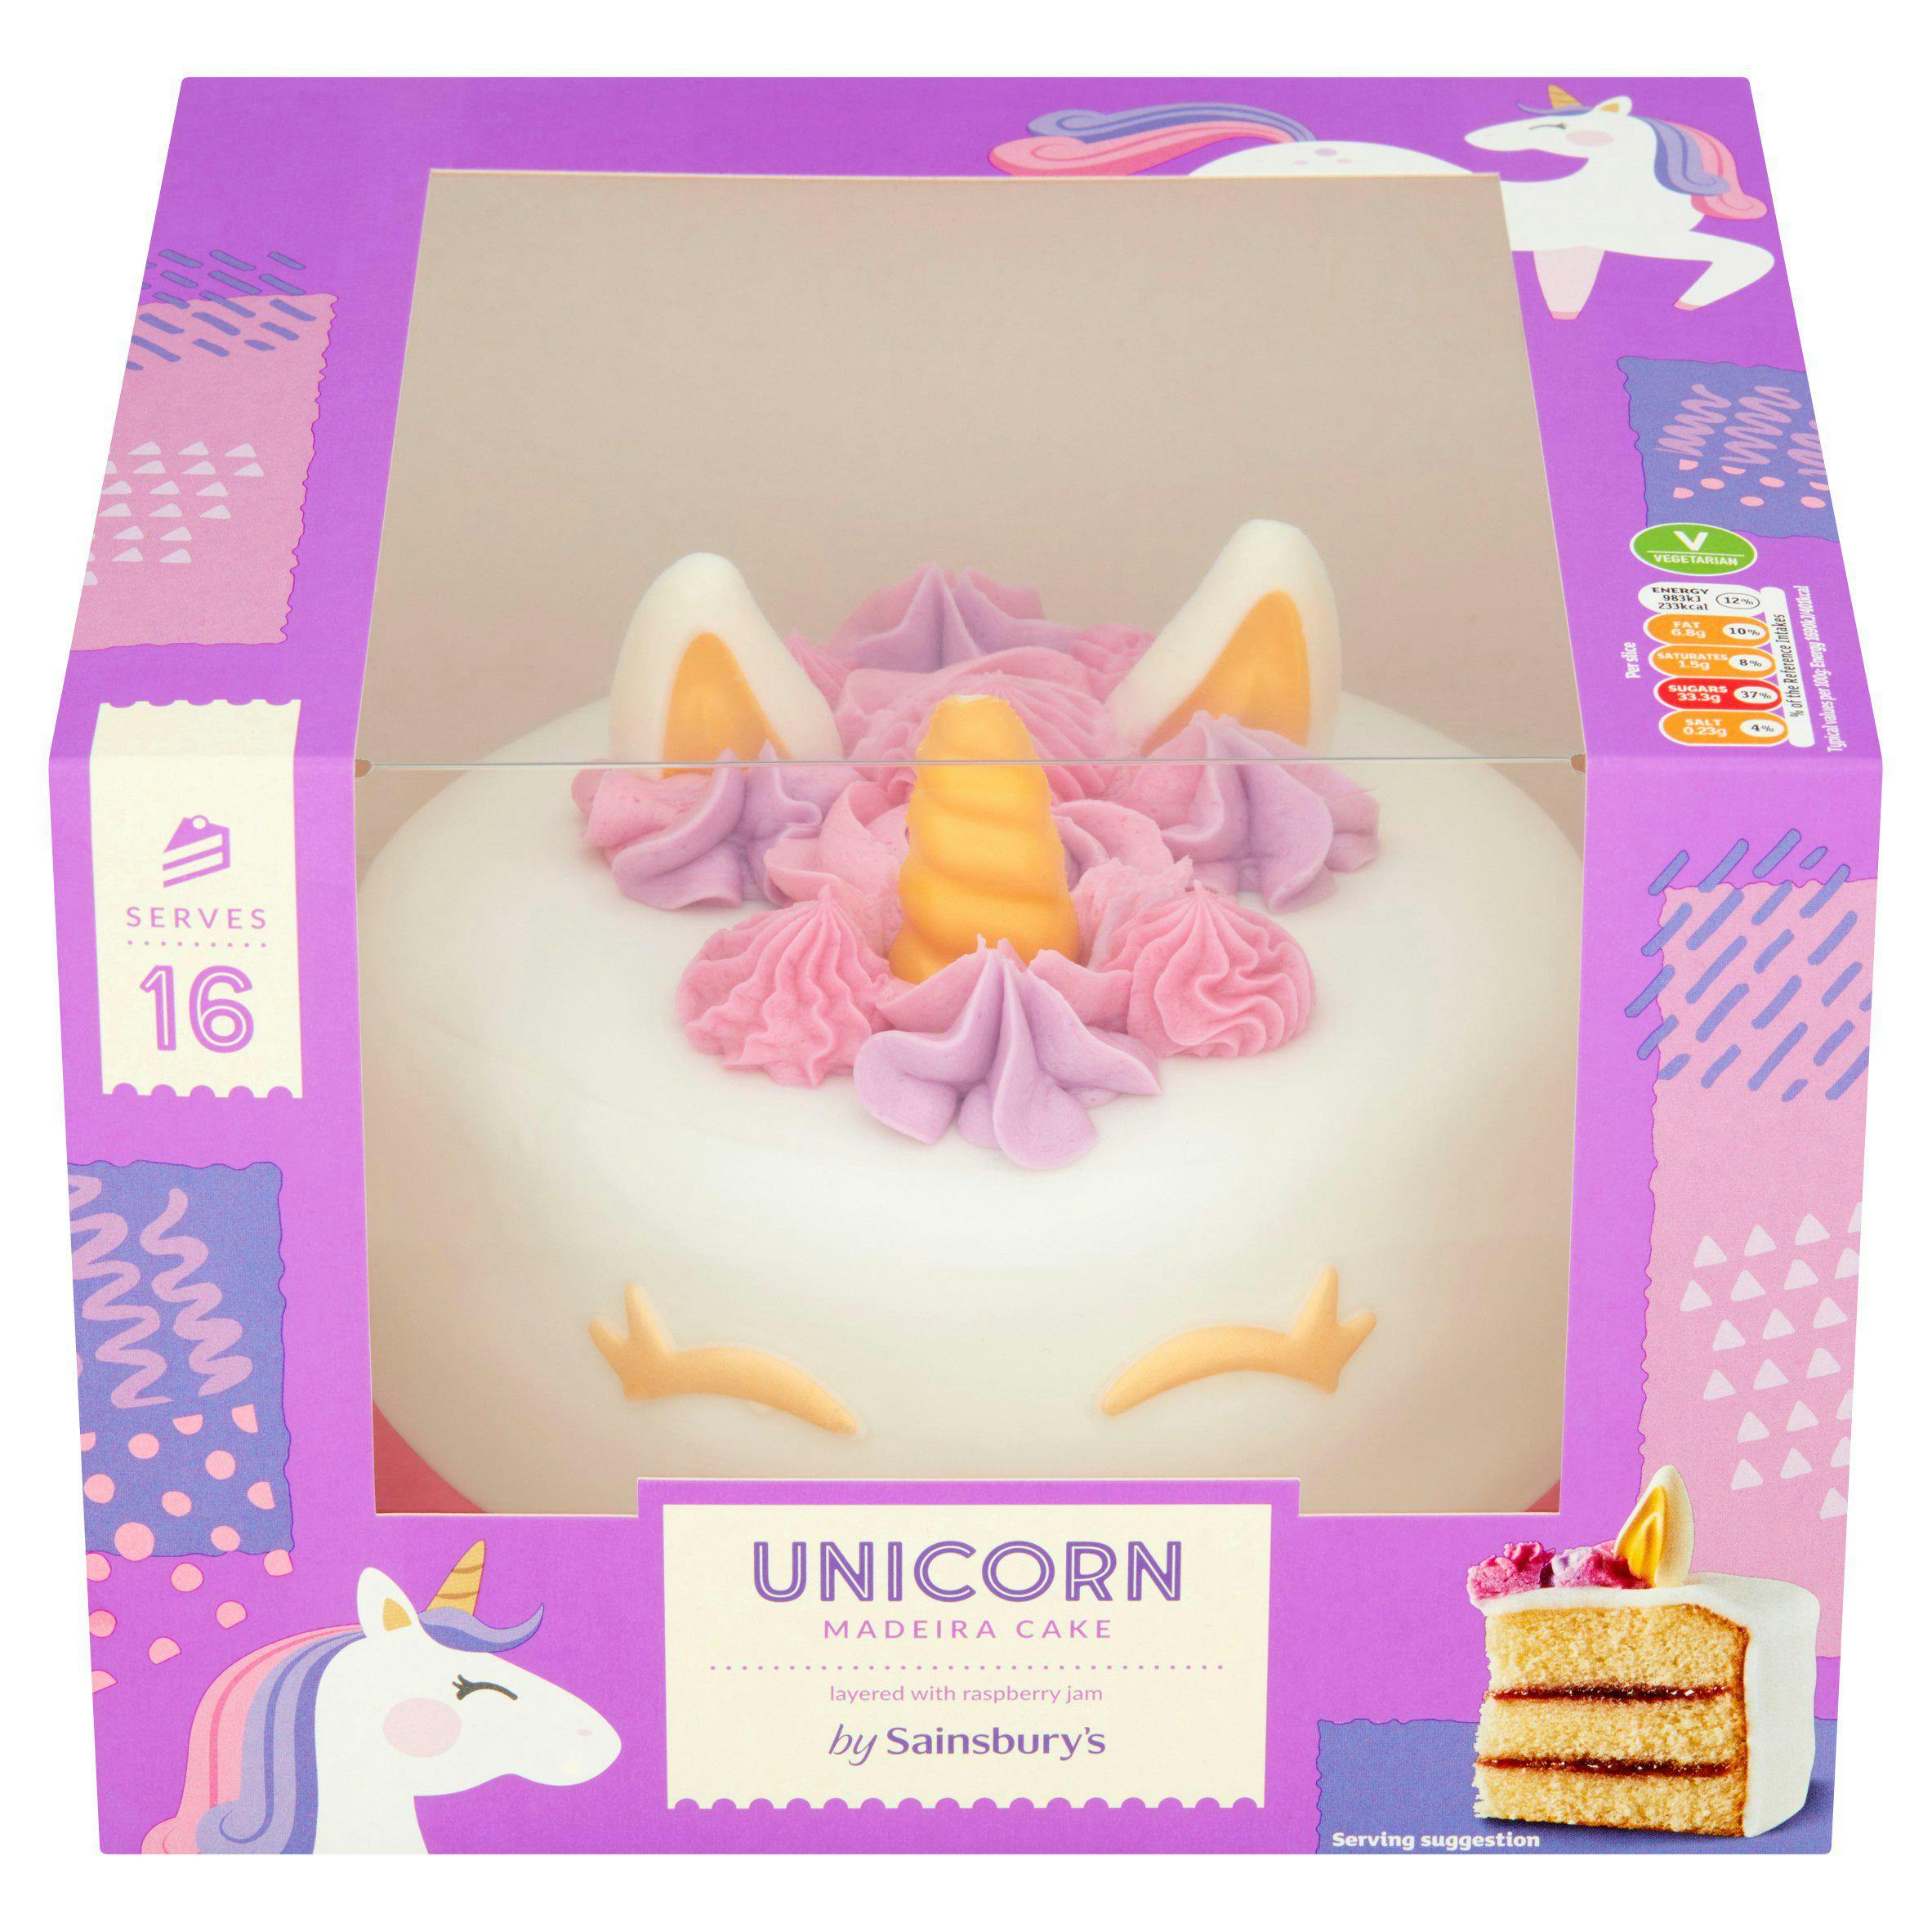 10 best gluten-free birthday cakes | The Independent | The Independent